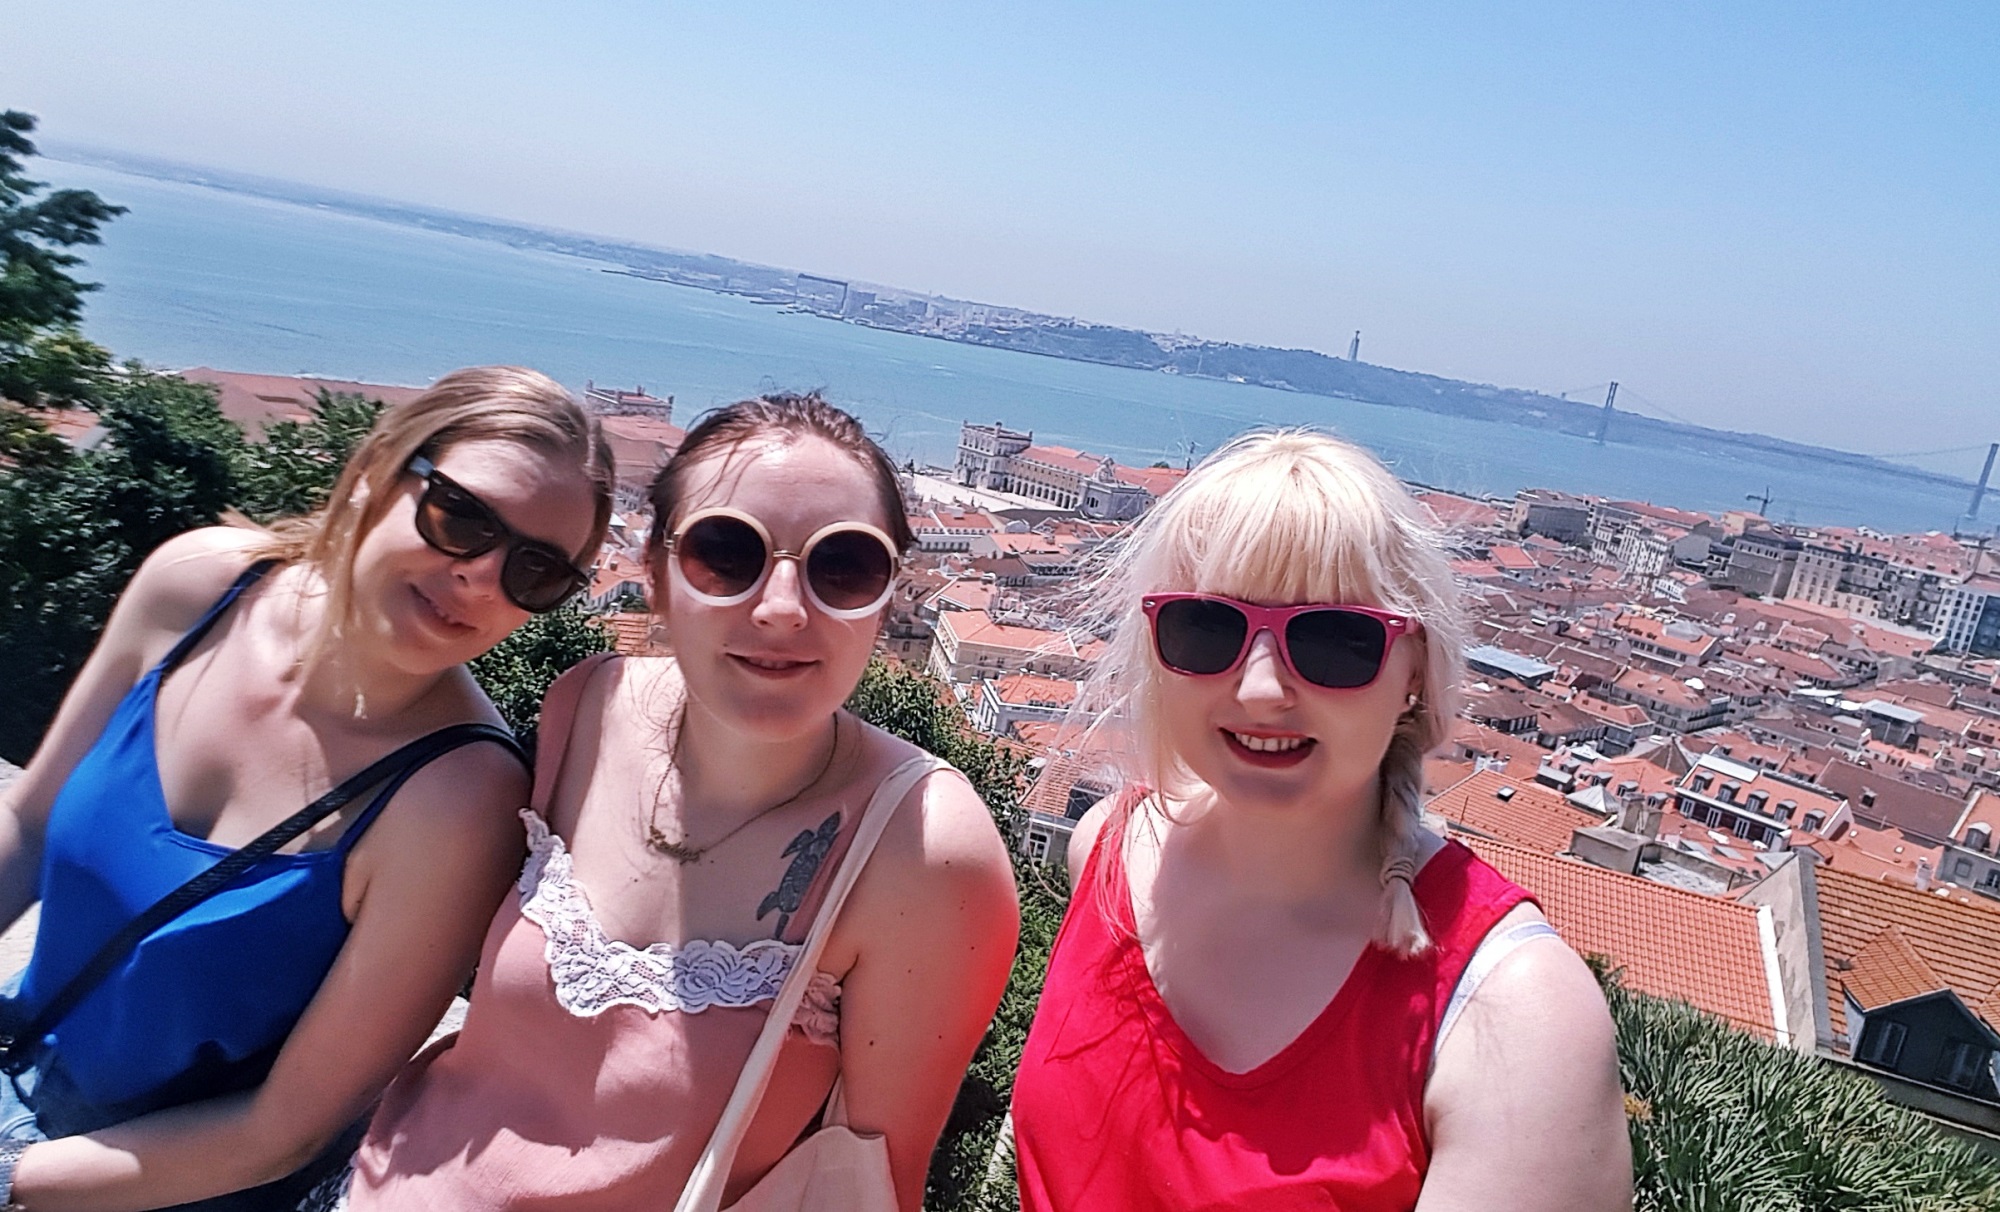 Having an amazing time in Lisbon despite not being able to see properly - One Broken Foot, Two Chronic Illnesses, and the Importance of Positivity by BeckyBecky Blogs